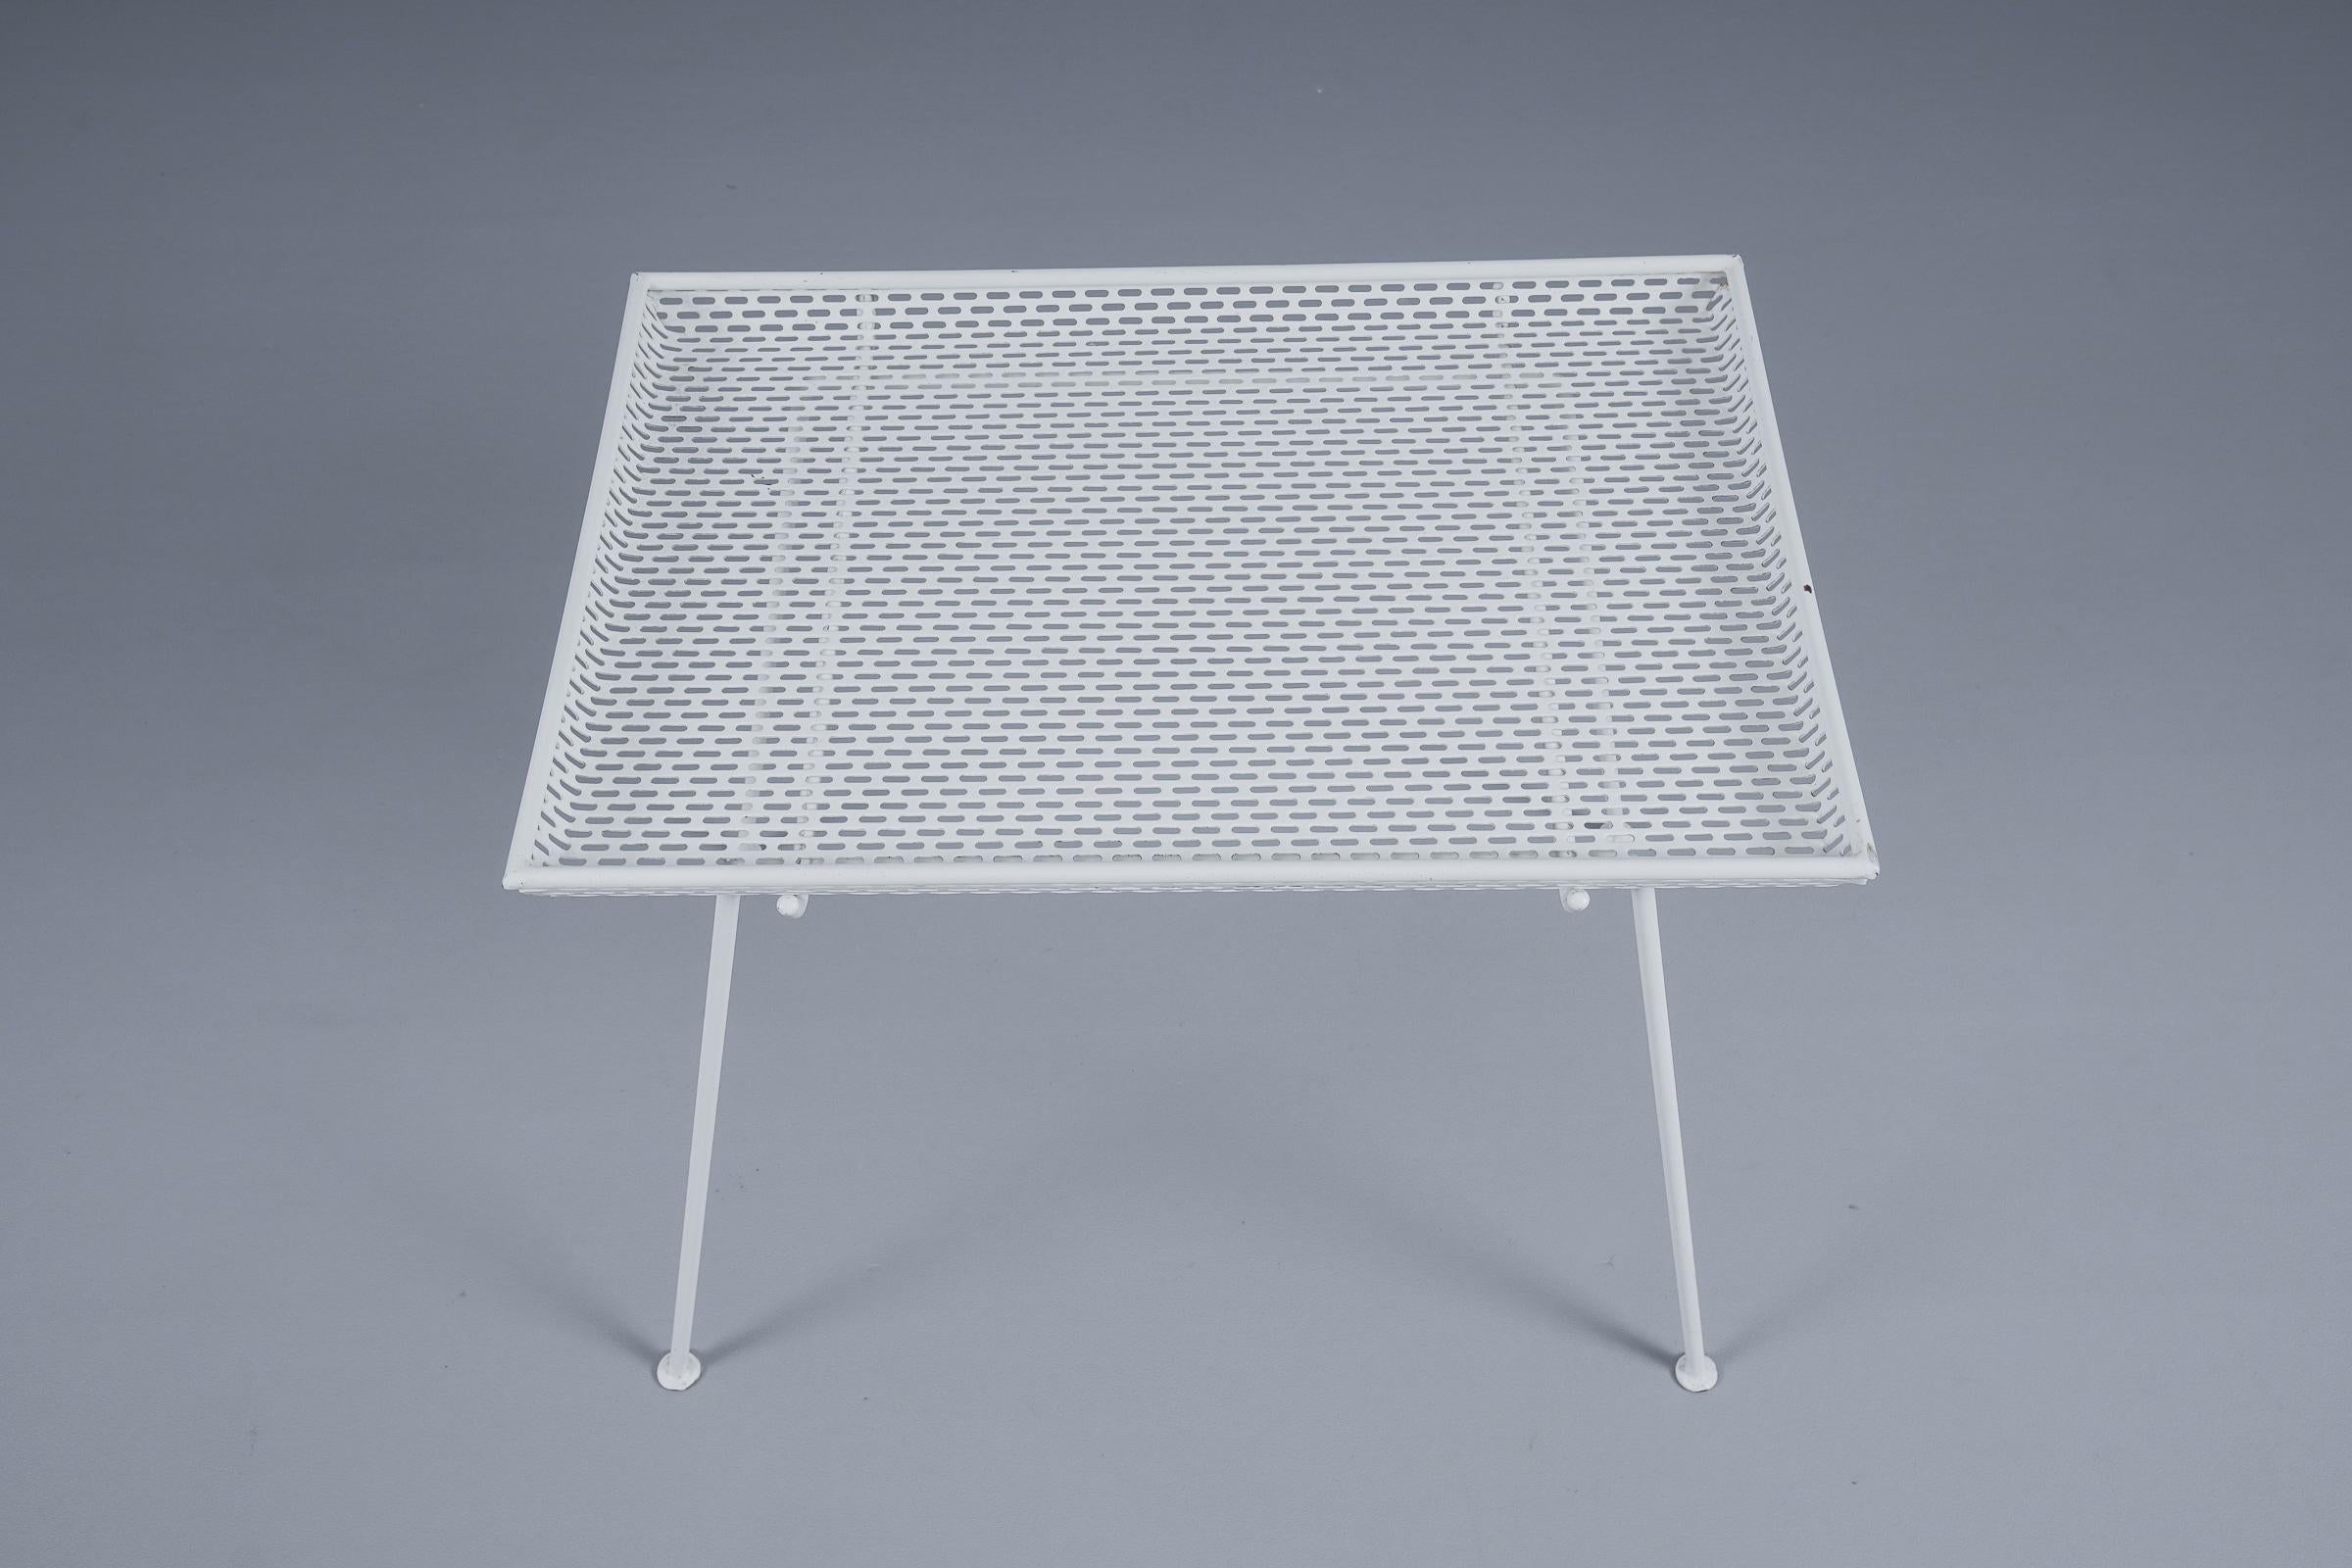 French Side Table in Perforated White Lacquered Metal With Removable Tray, 1950s For Sale 2